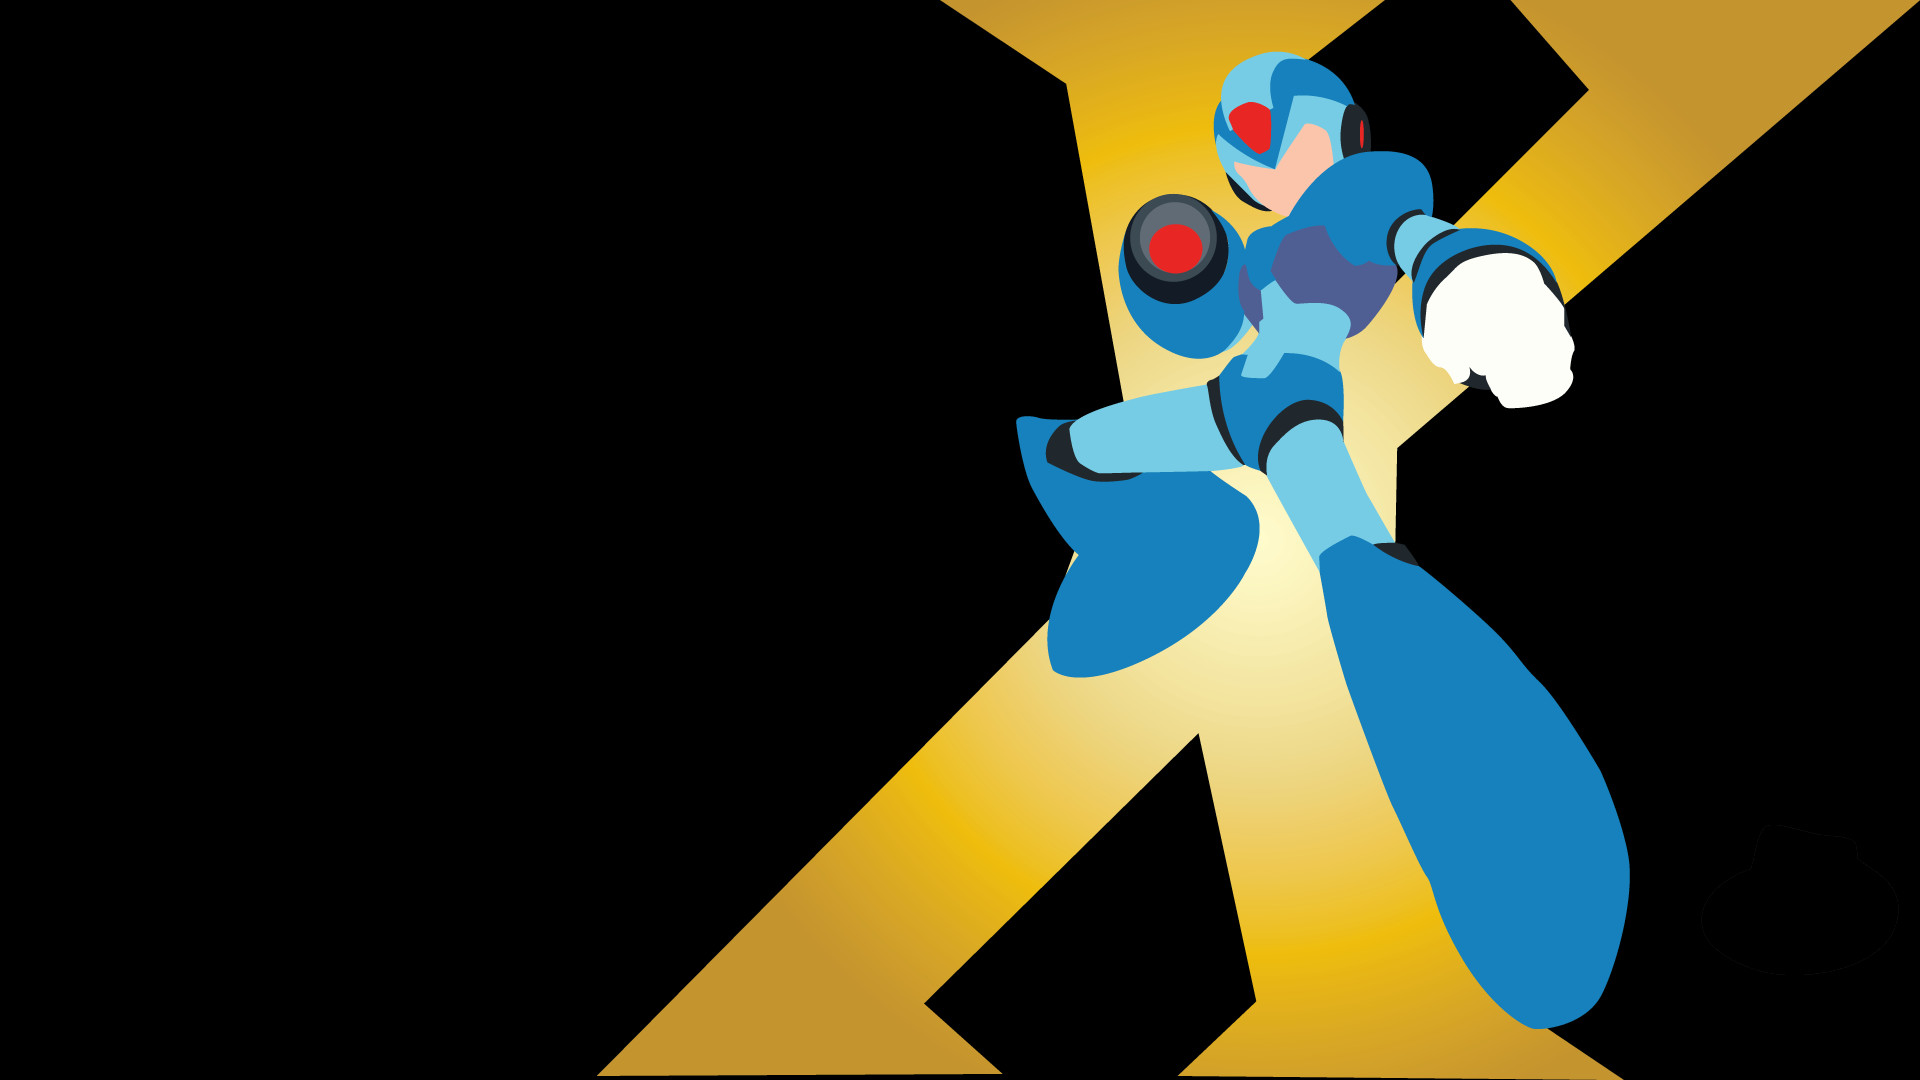 1920x1080 Explore More Wallpapers in the Mega Man X Subcategory!